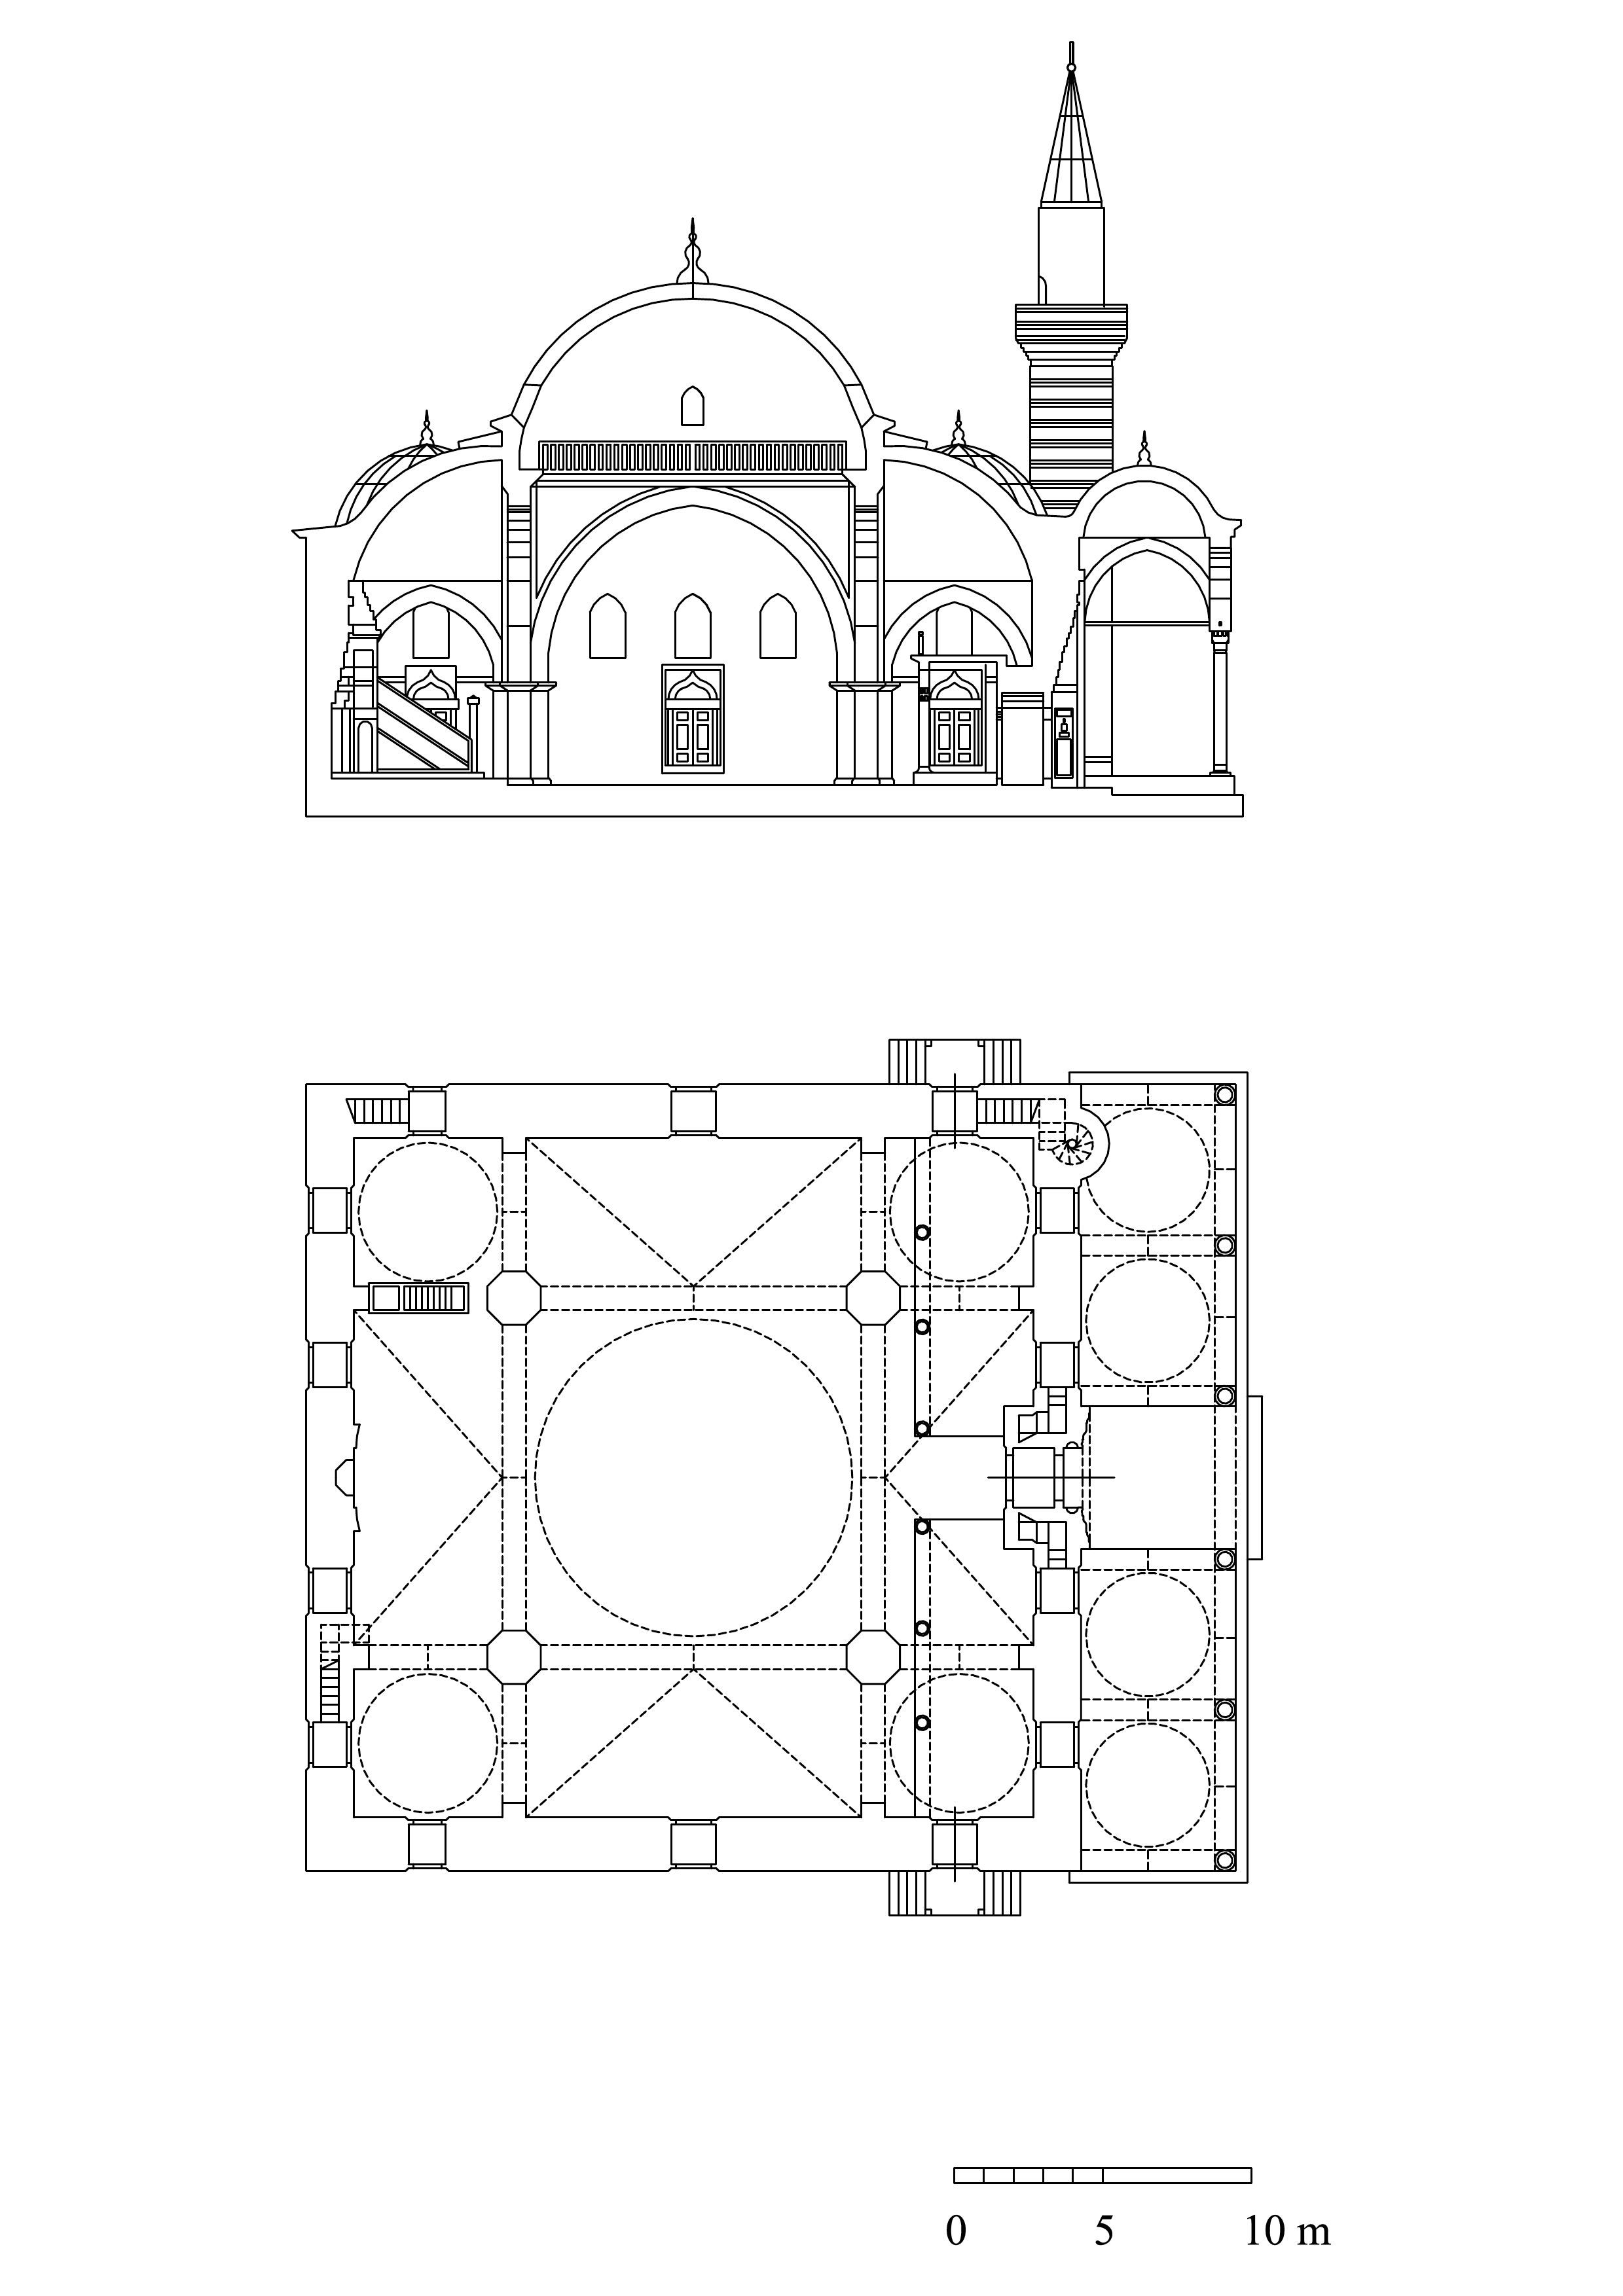 Floor plan and section of Lala Mustafa Pasa Mosque